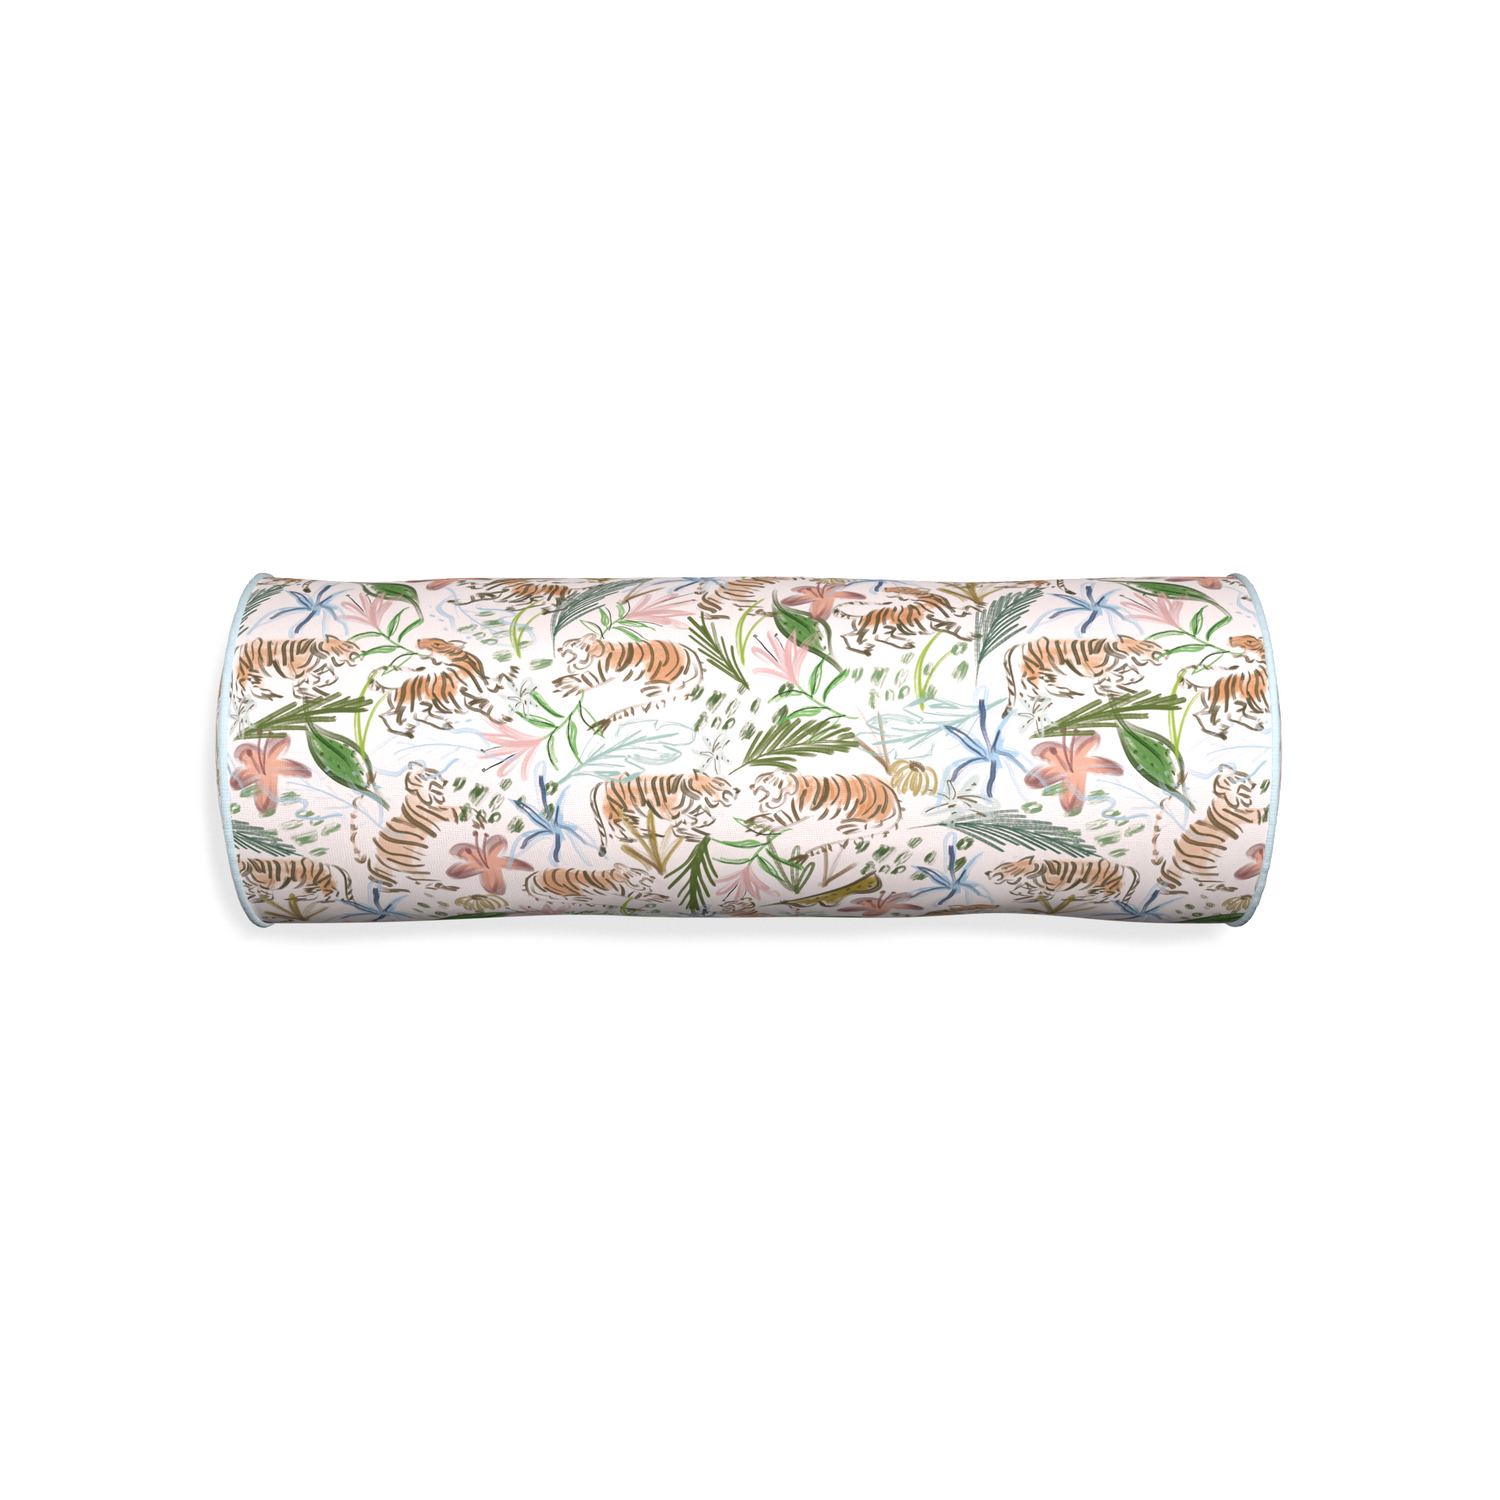 Bolster frida pink custom pink chinoiserie tigerpillow with powder piping on white background